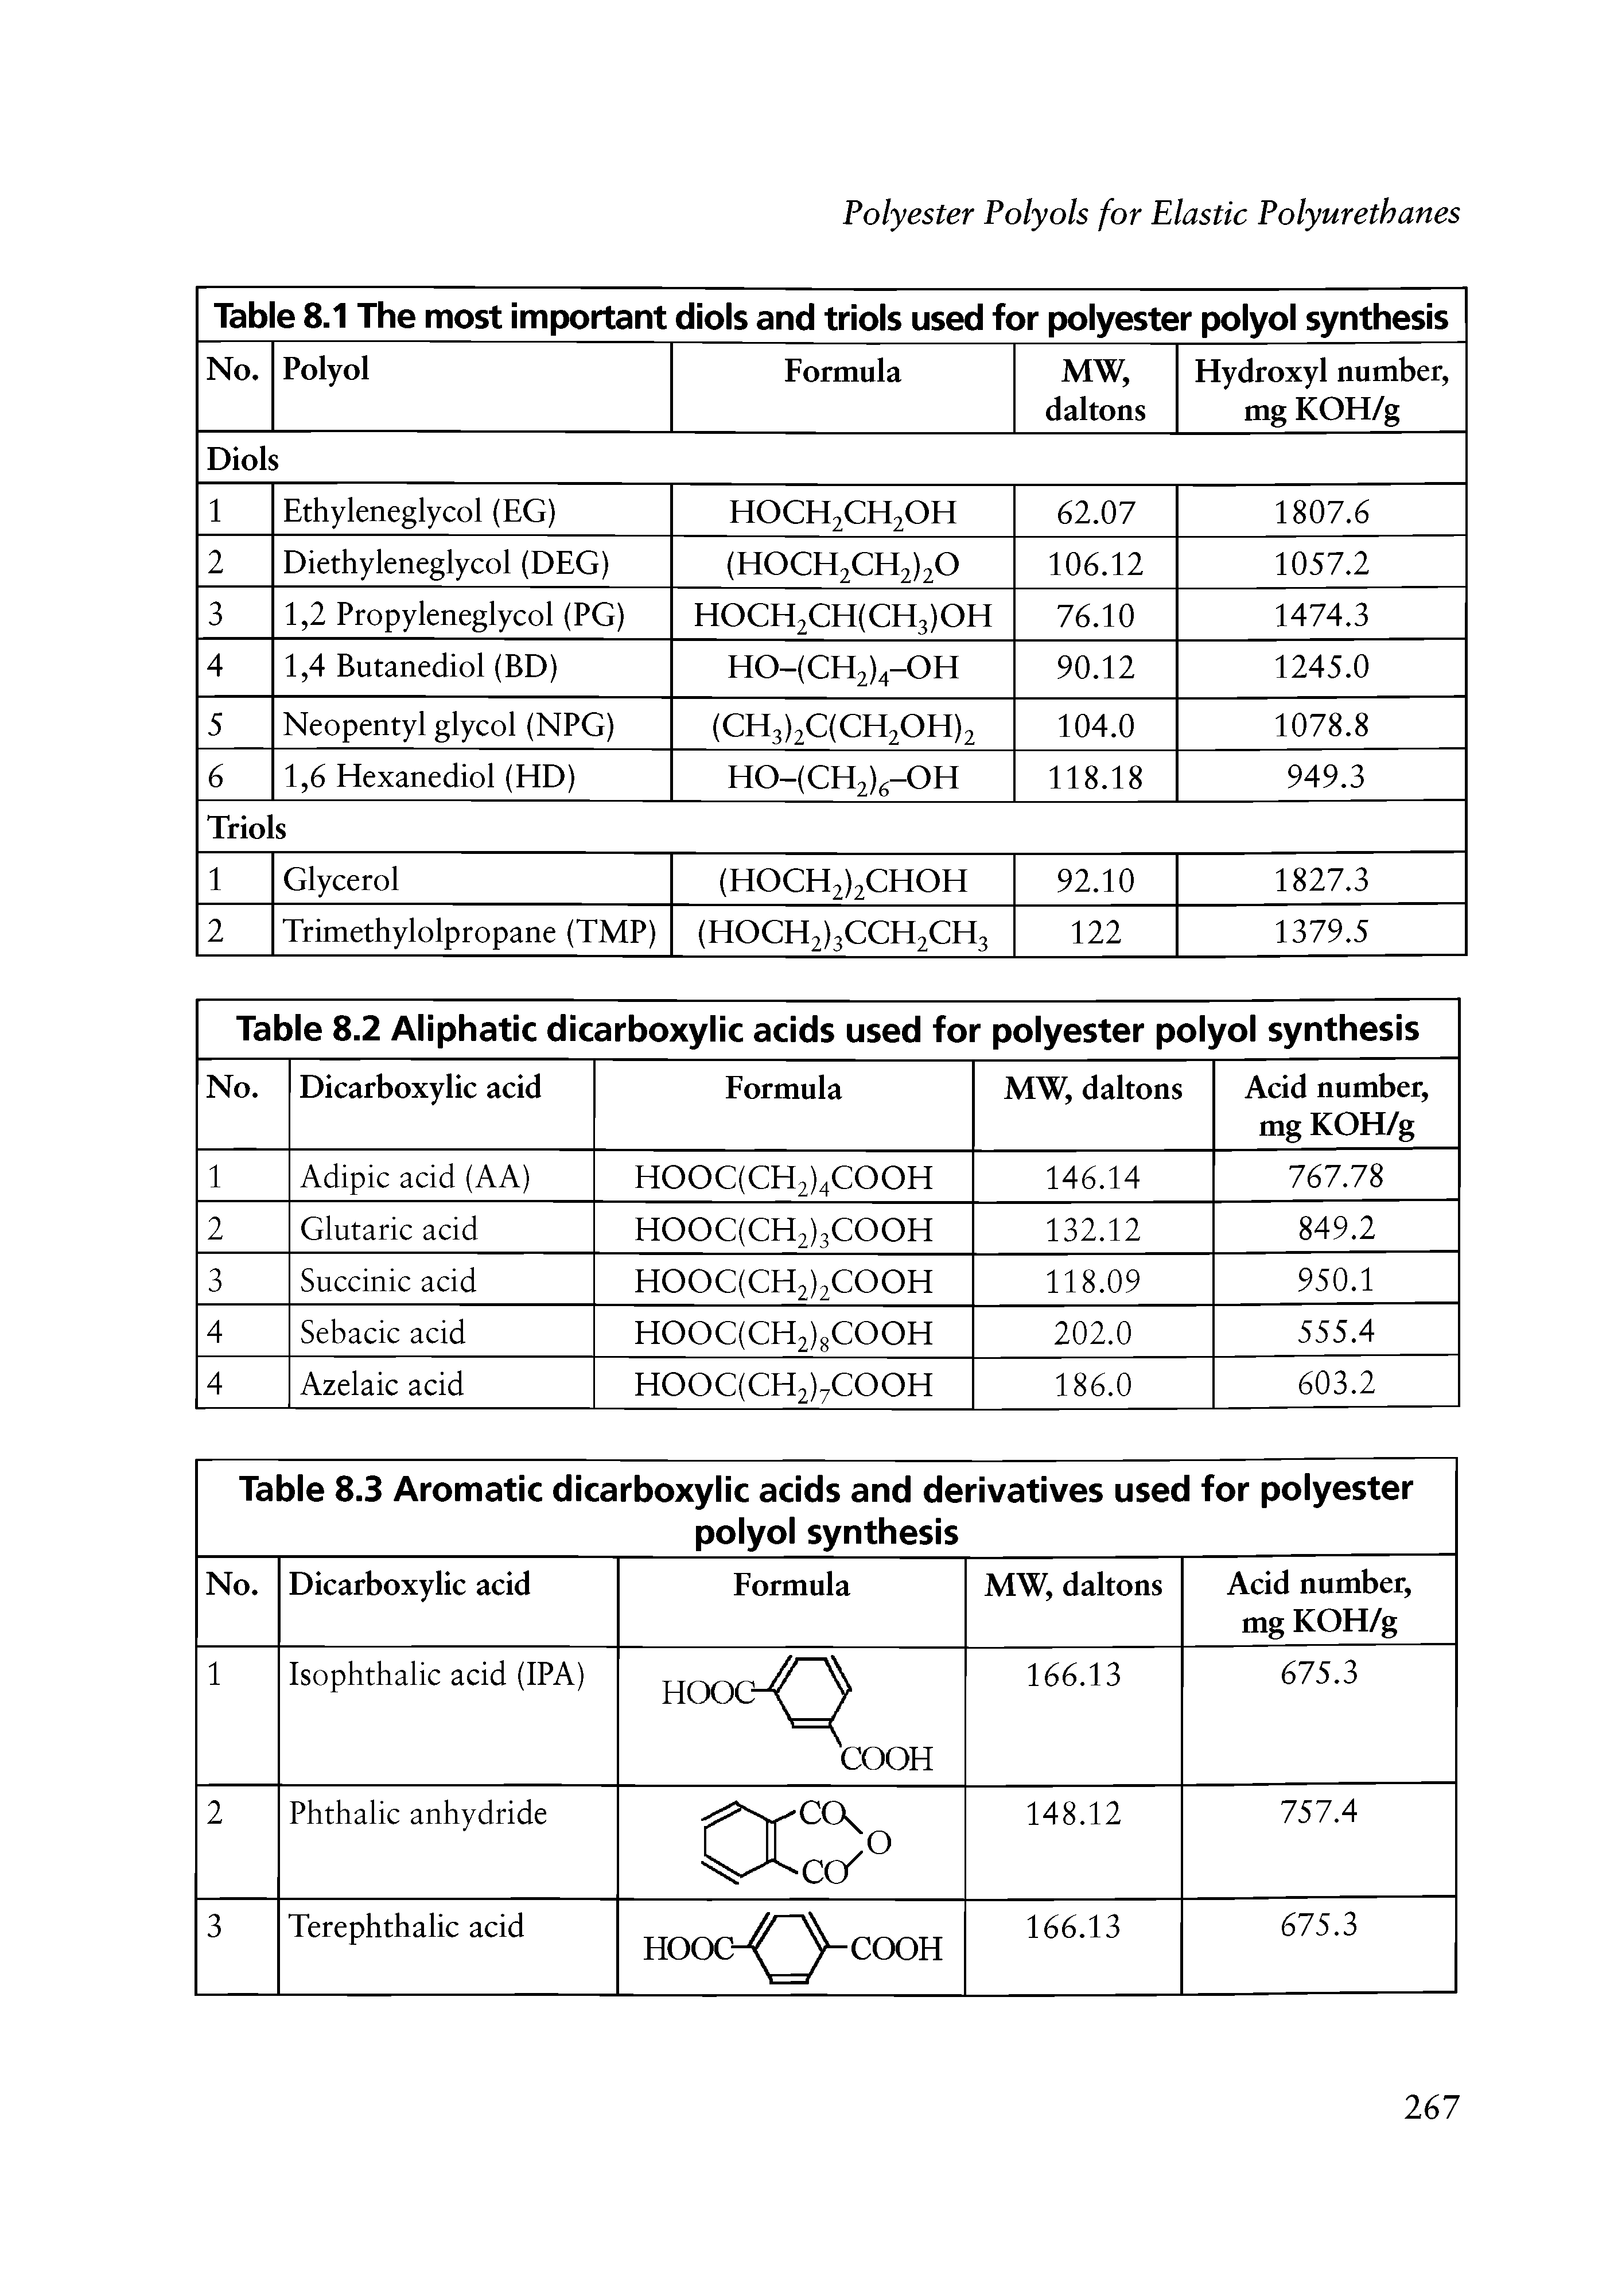 Table 8.3 Aromatic dicarboxylic acids and derivatives used for polyester polyol synthesis ...